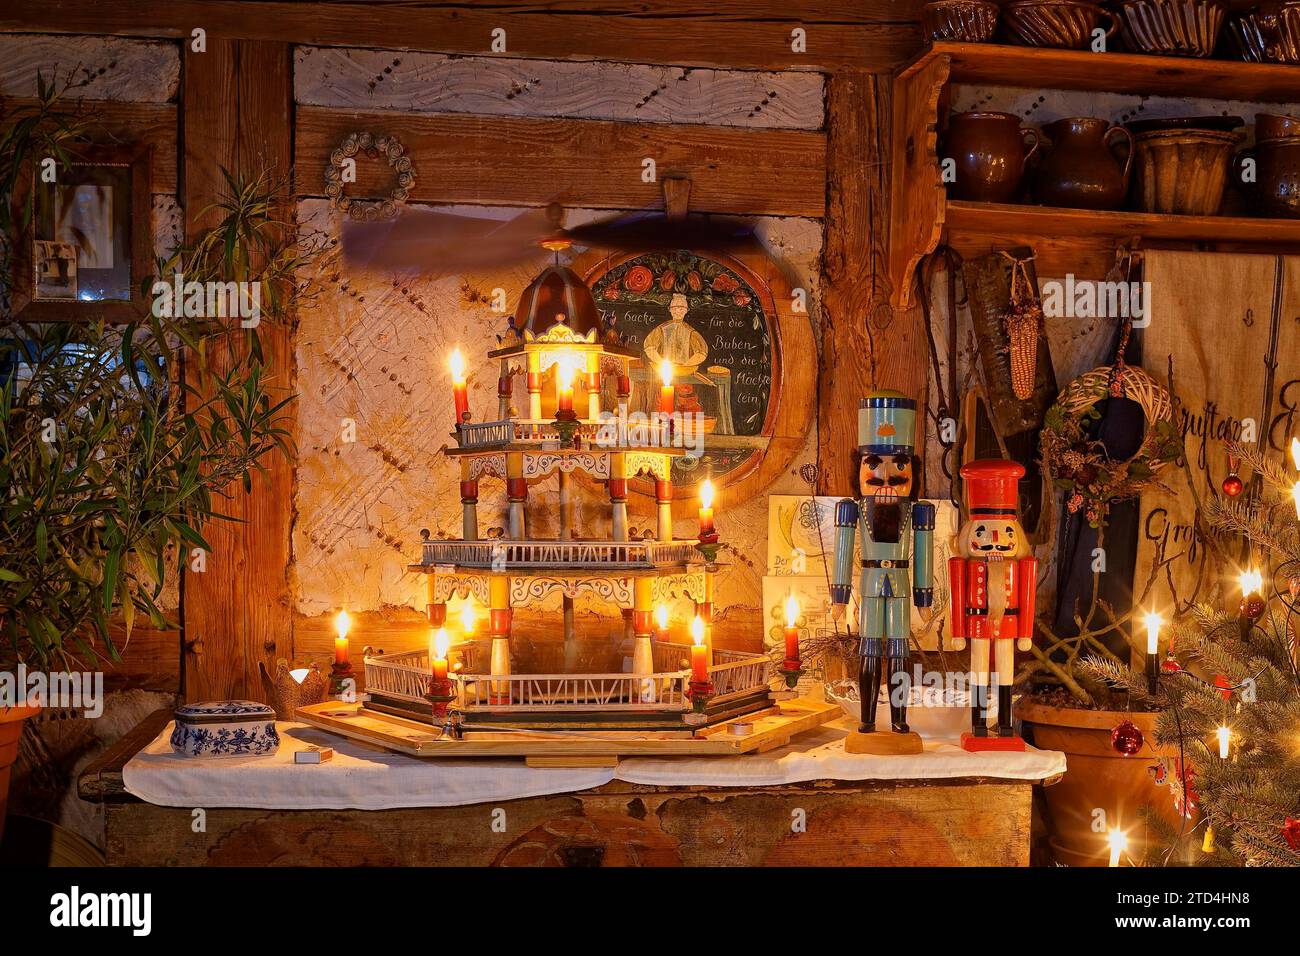 Pyramid from 1880 and Erzgebirge nutcrackers in the Christmassy ambience of a Saxon farmhouse Stock Photo